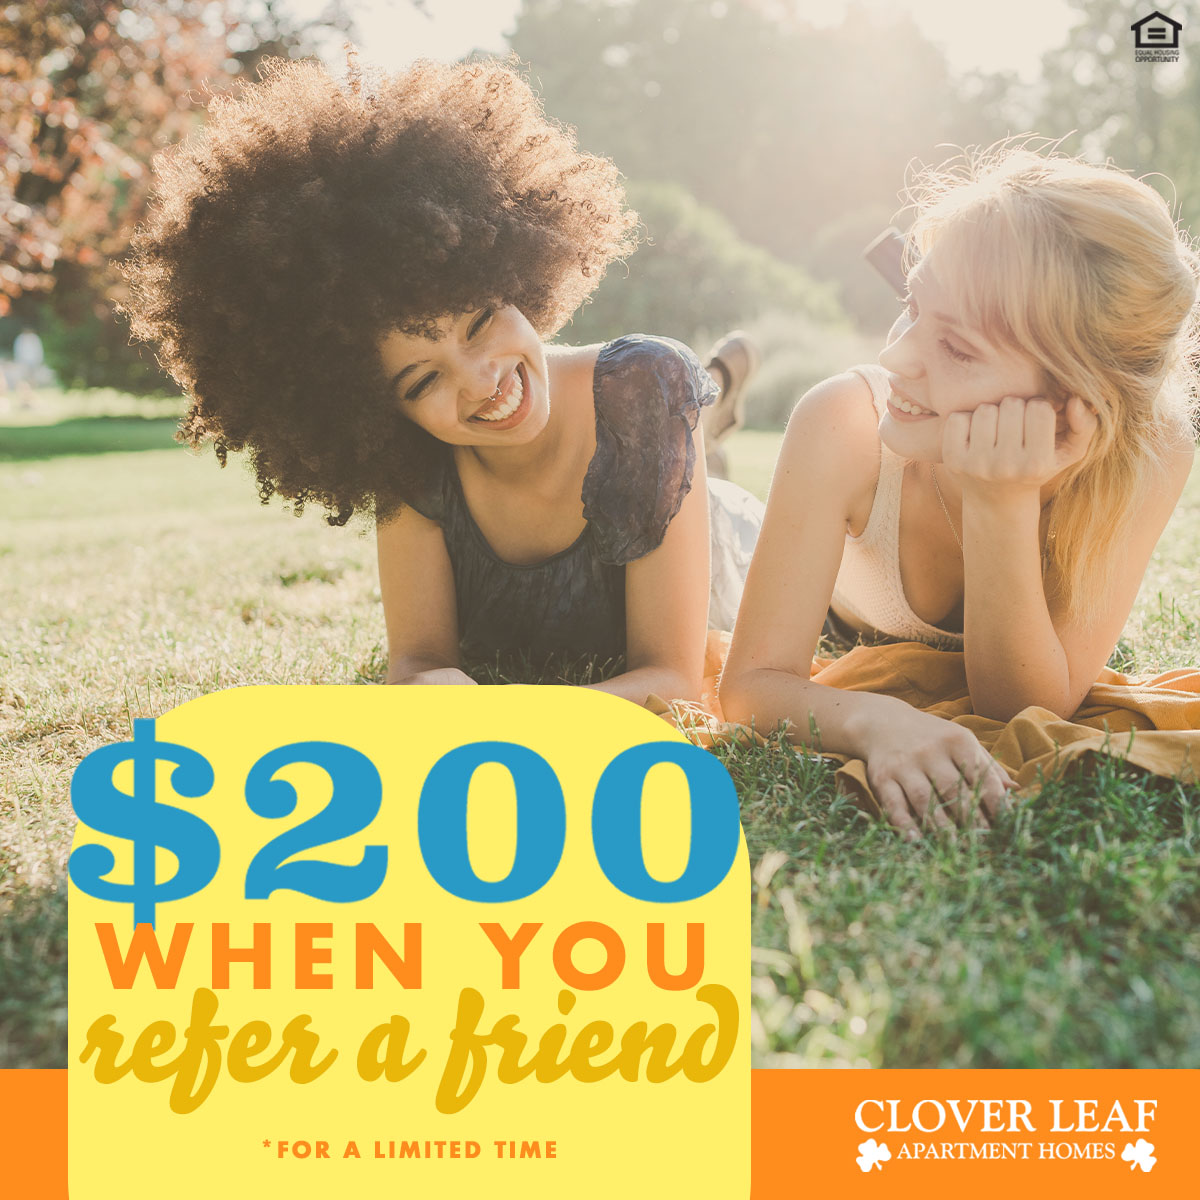 Spring into happiness when you refer your friend to our community and gain a new neighbor and $200! 😊🌼💰 All you have to do is send them the application link and then wait for them to #apply, get approved and #movein. 📝 bit.ly/cloverleafapp